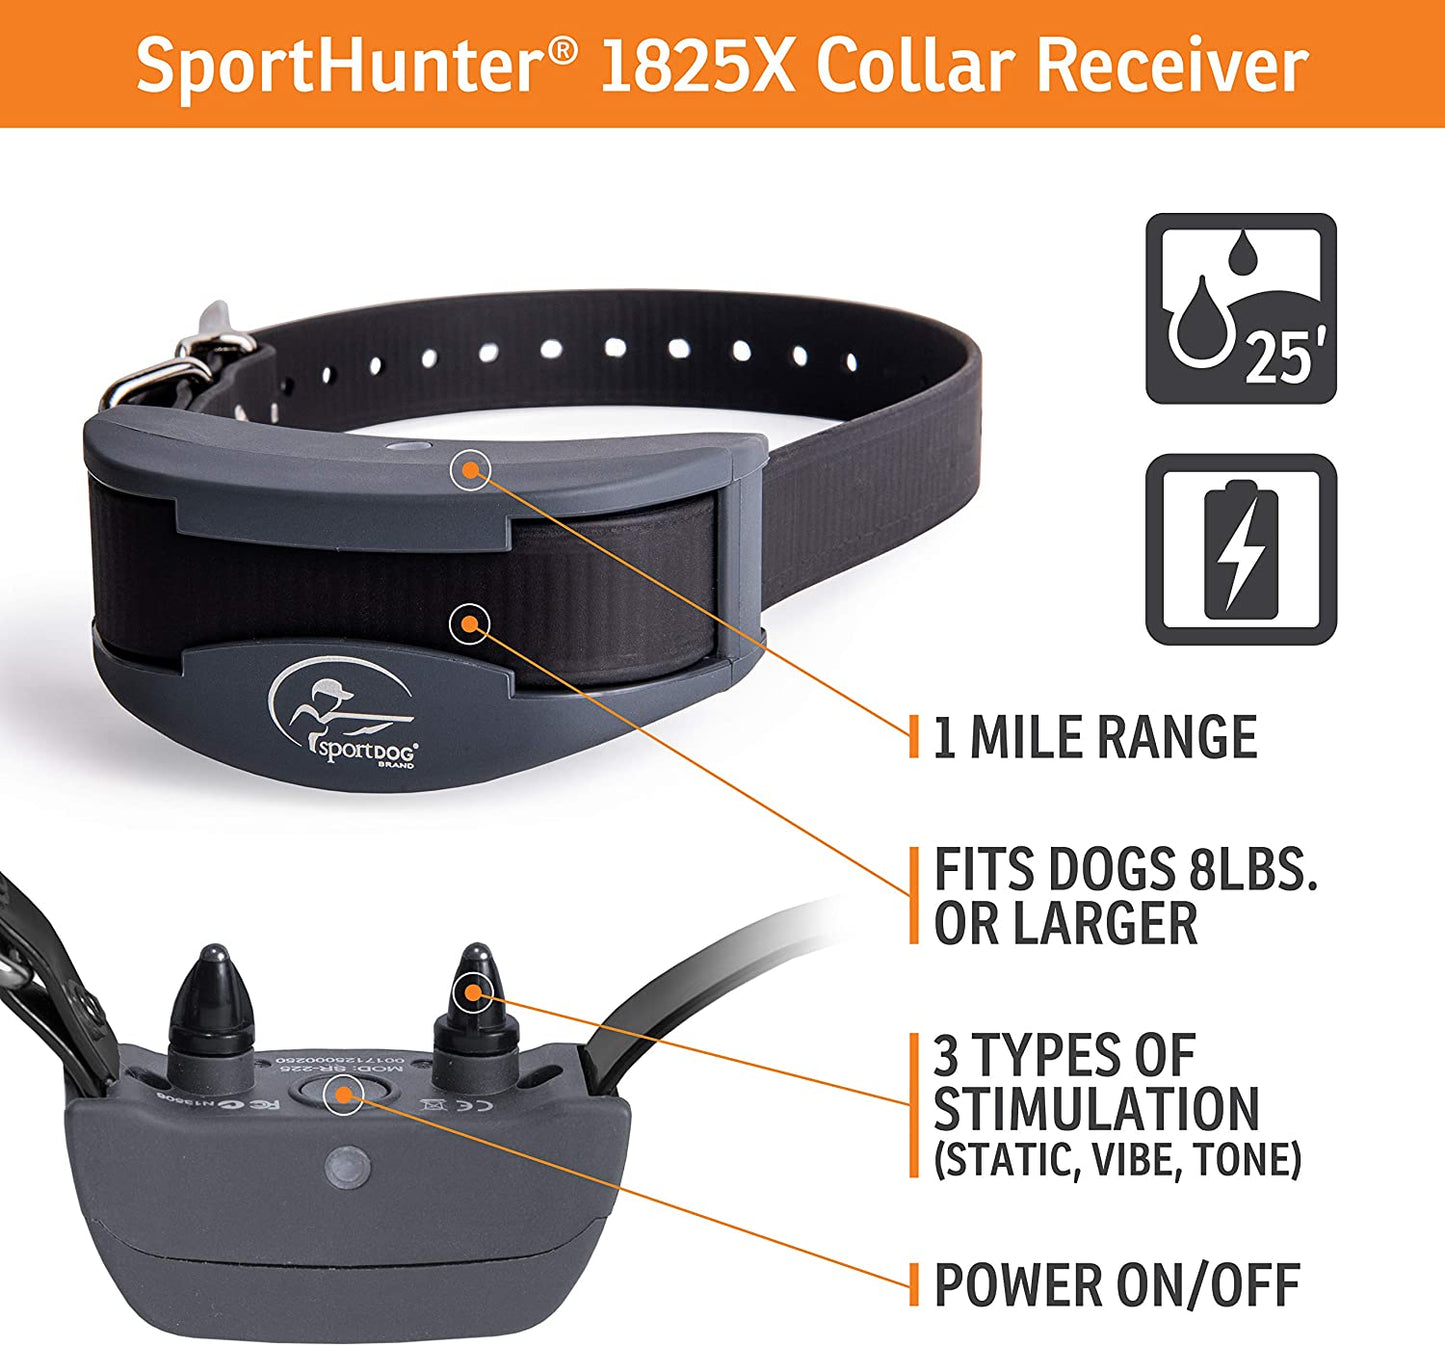 SportDOG Brand SportHunter 1825X Remote Trainer - Rechargeable Dog Training Collar with Shock, Vibrate, and Tone - 1 Mile Range - SD-1825X - SD-1825X